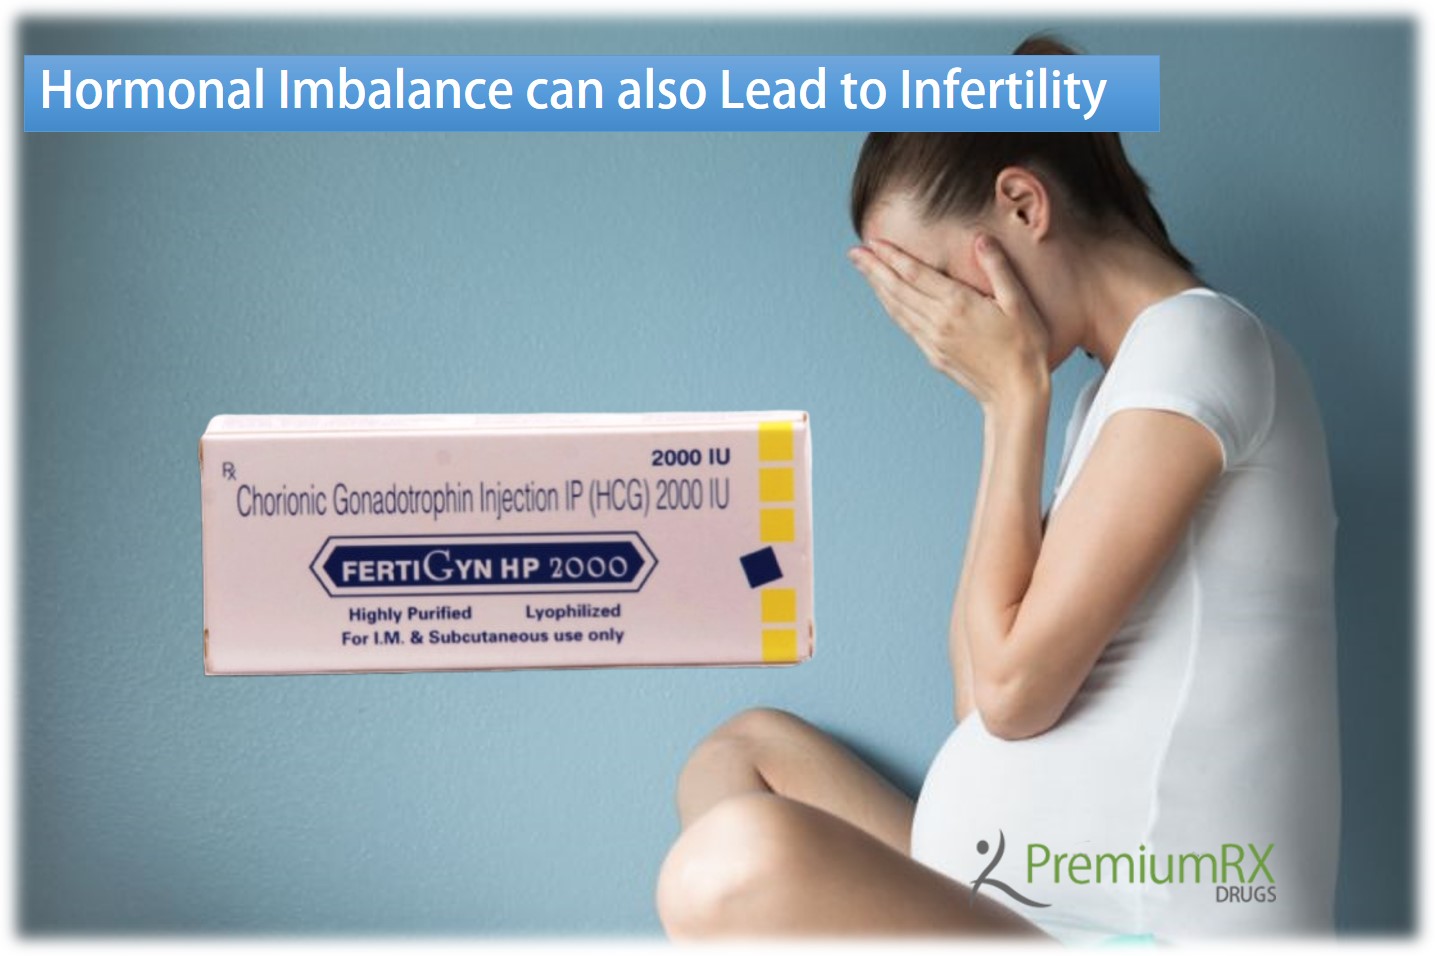 Hormonal Imbalance can also lead to infertility